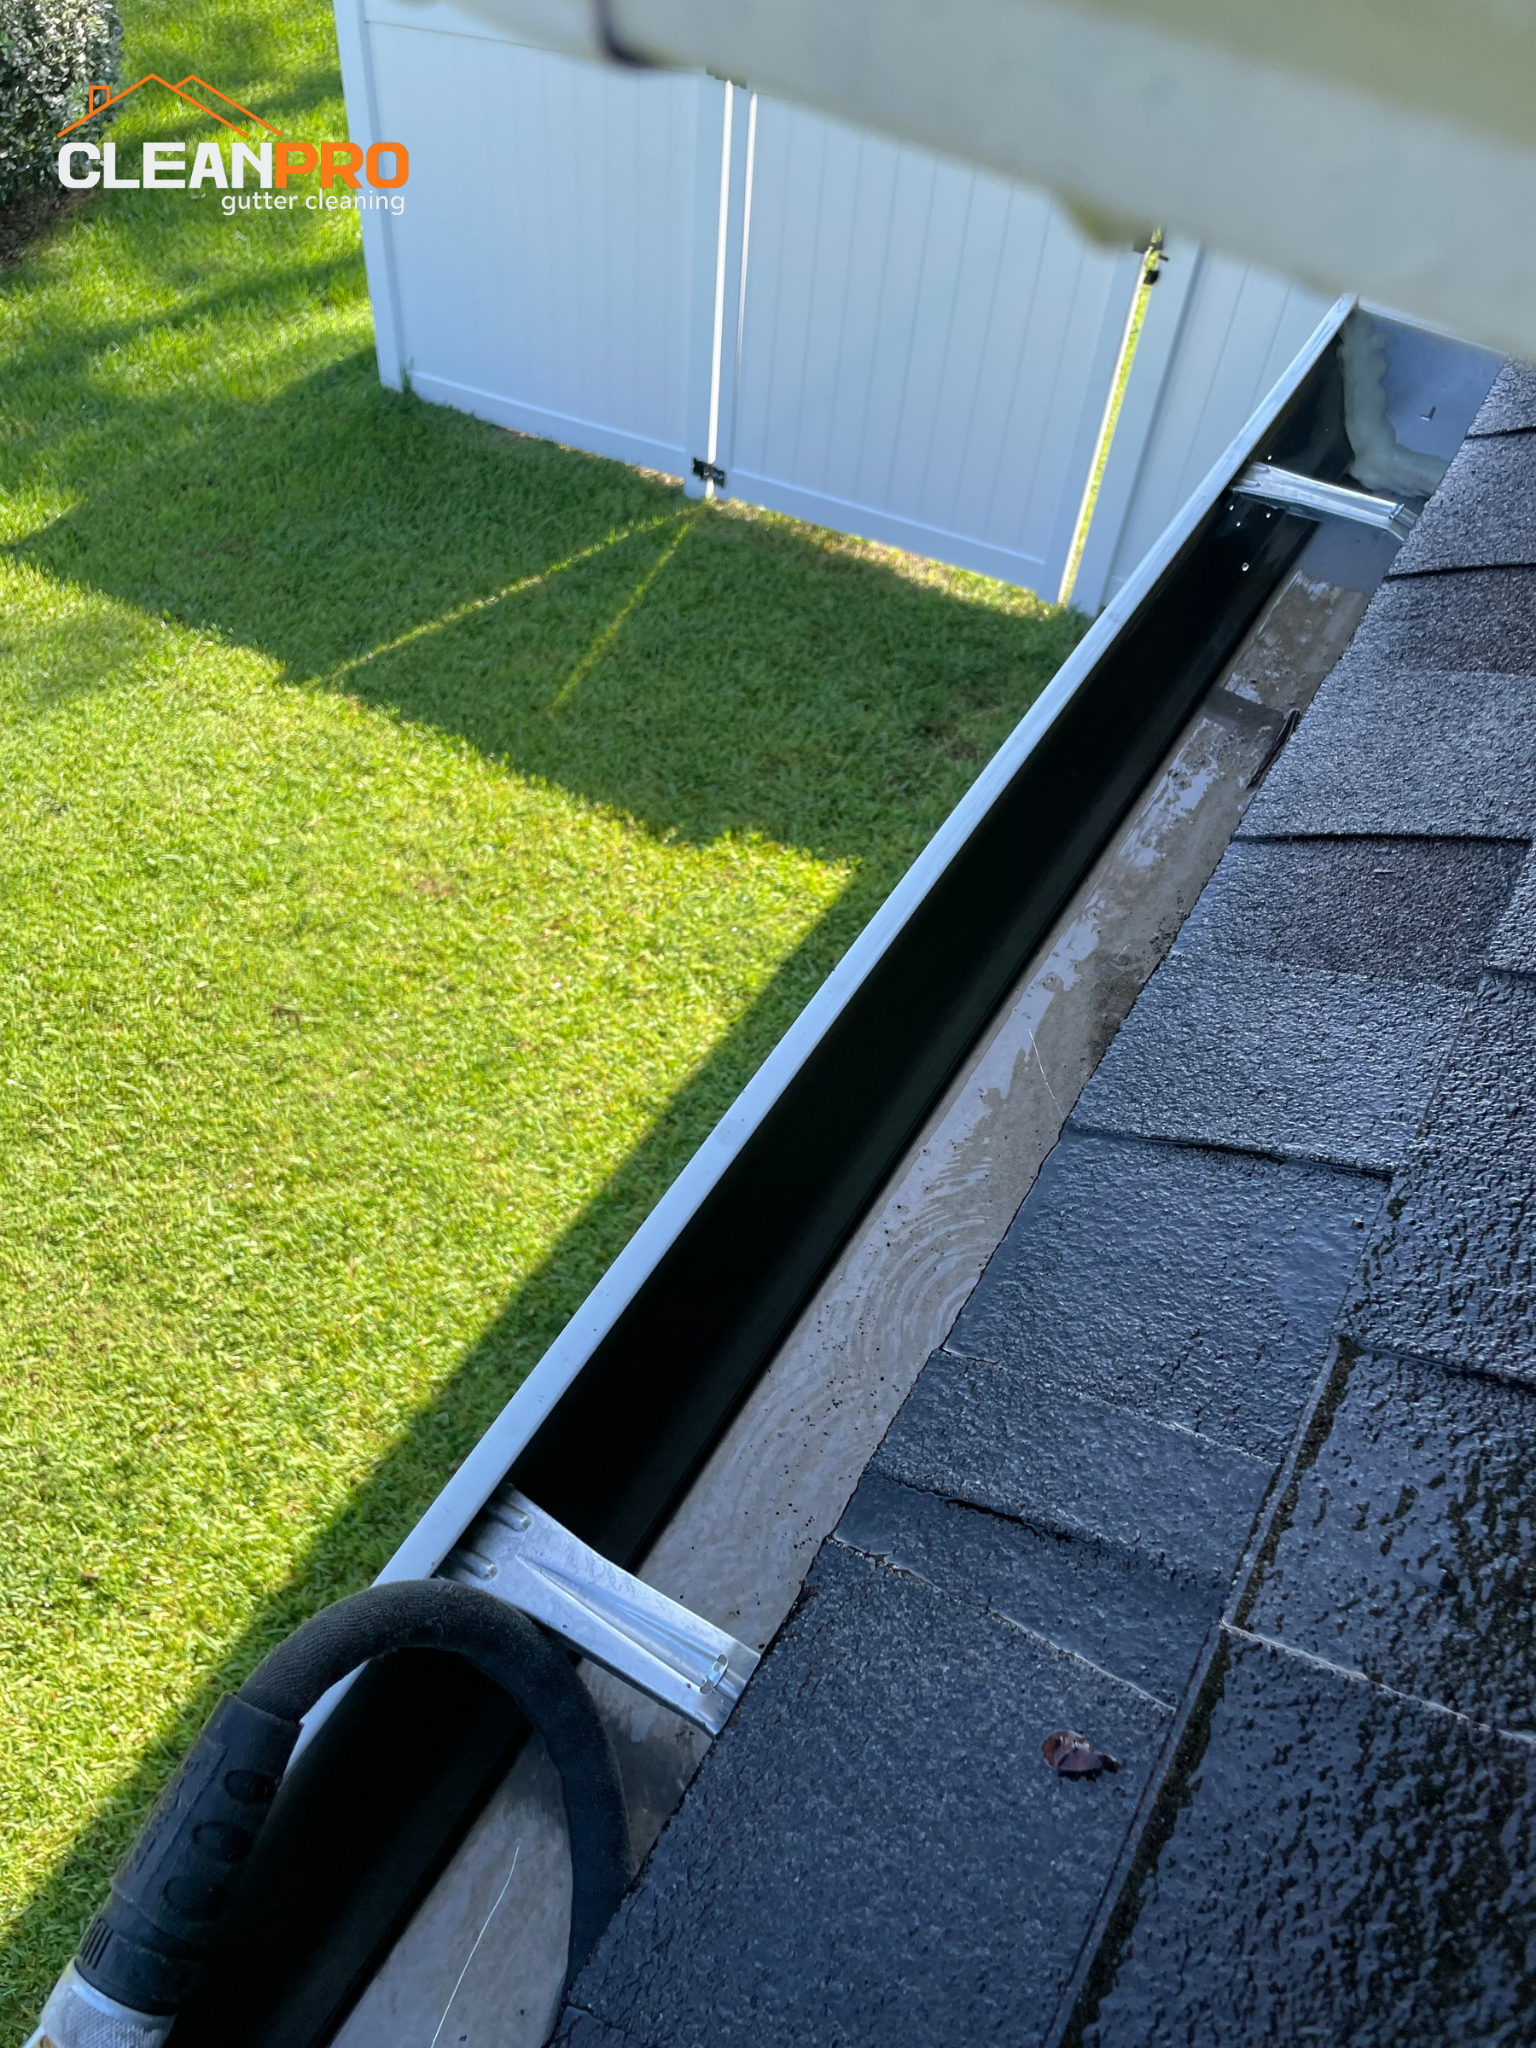 Best Gutter Cleaning Service in New Orleans